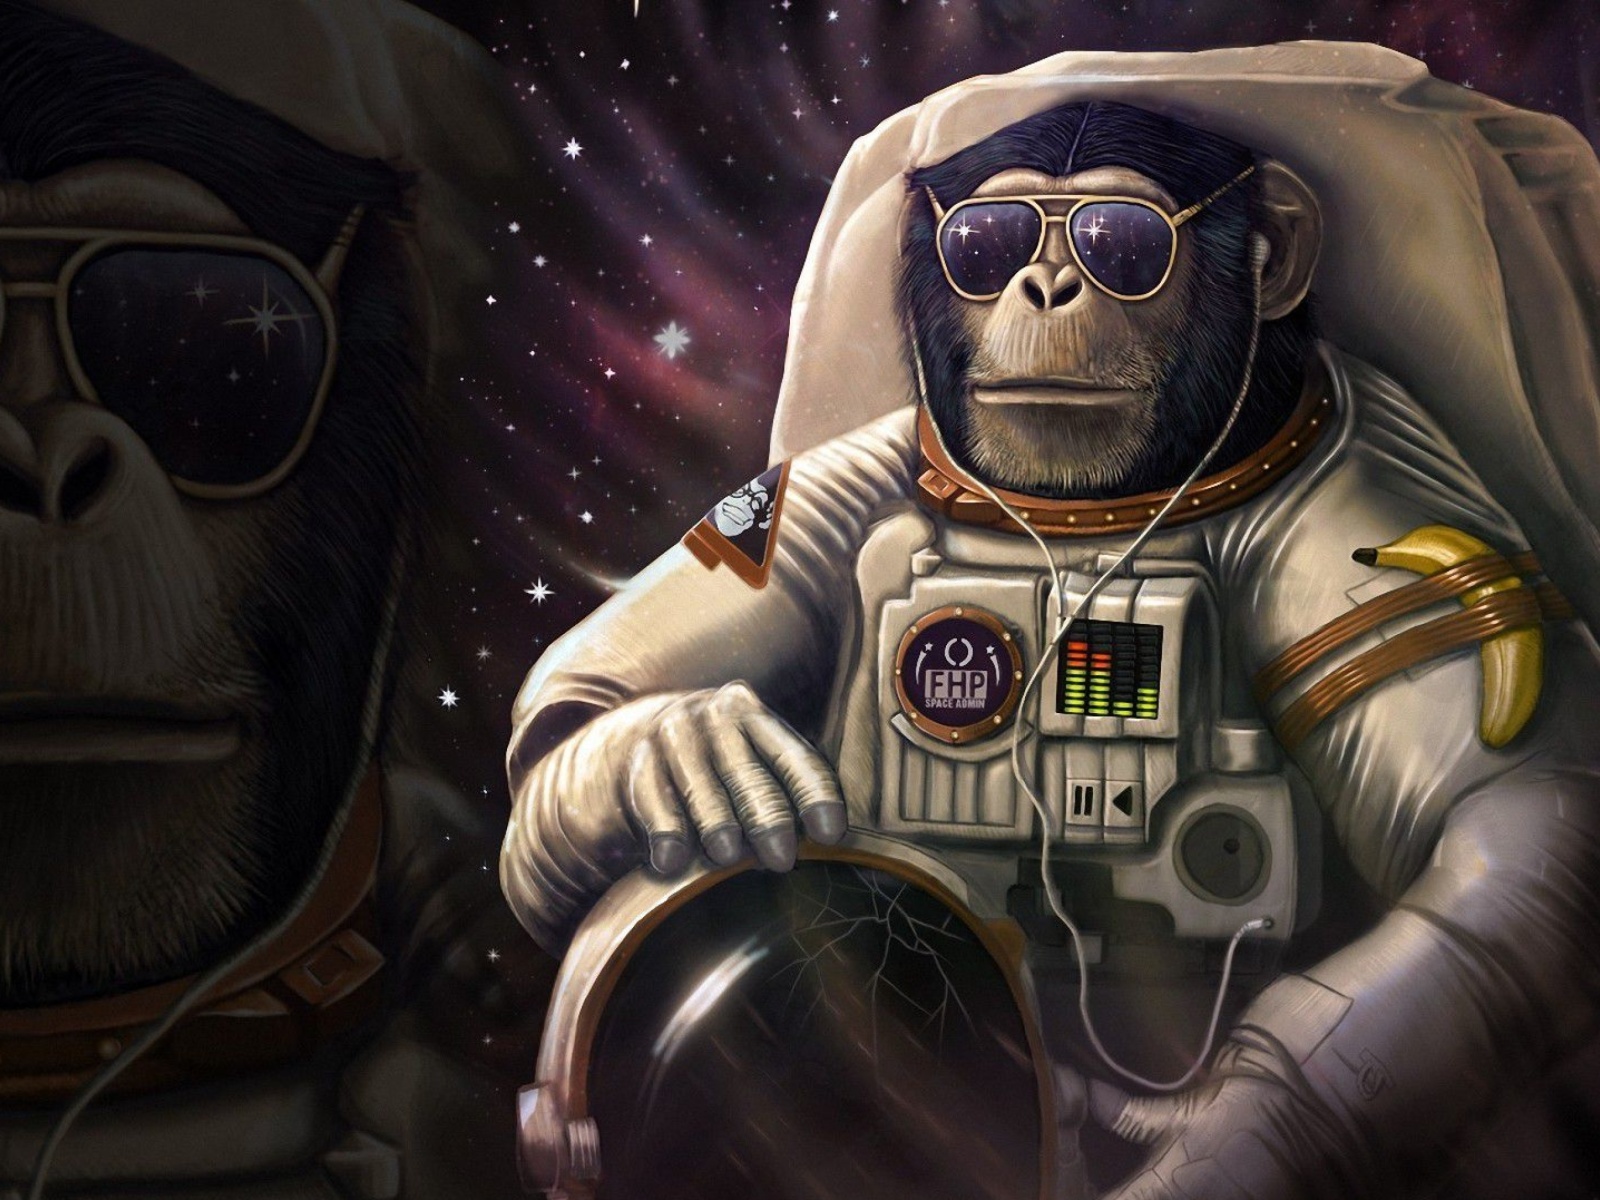 Monkeys and apes in space wallpaper 1600x1200